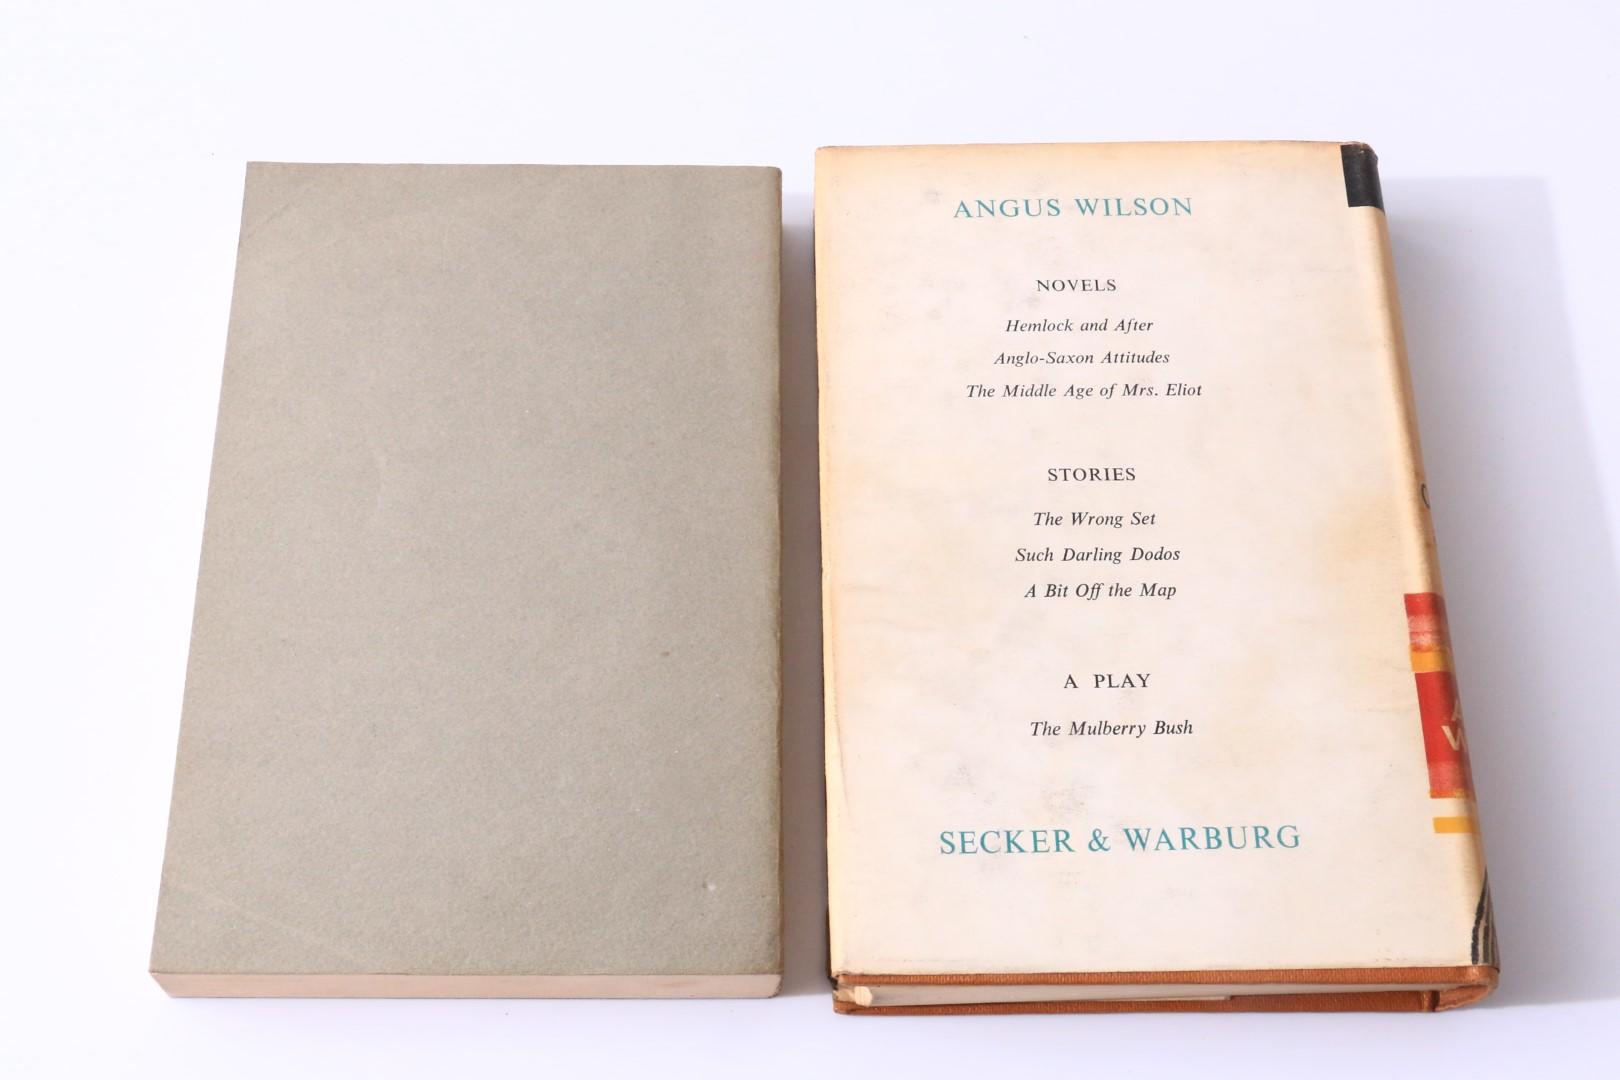 Angus Wilson - The Old Men at the Zoo w/ Proof - Secker & Warburg, 1961, First Edition.